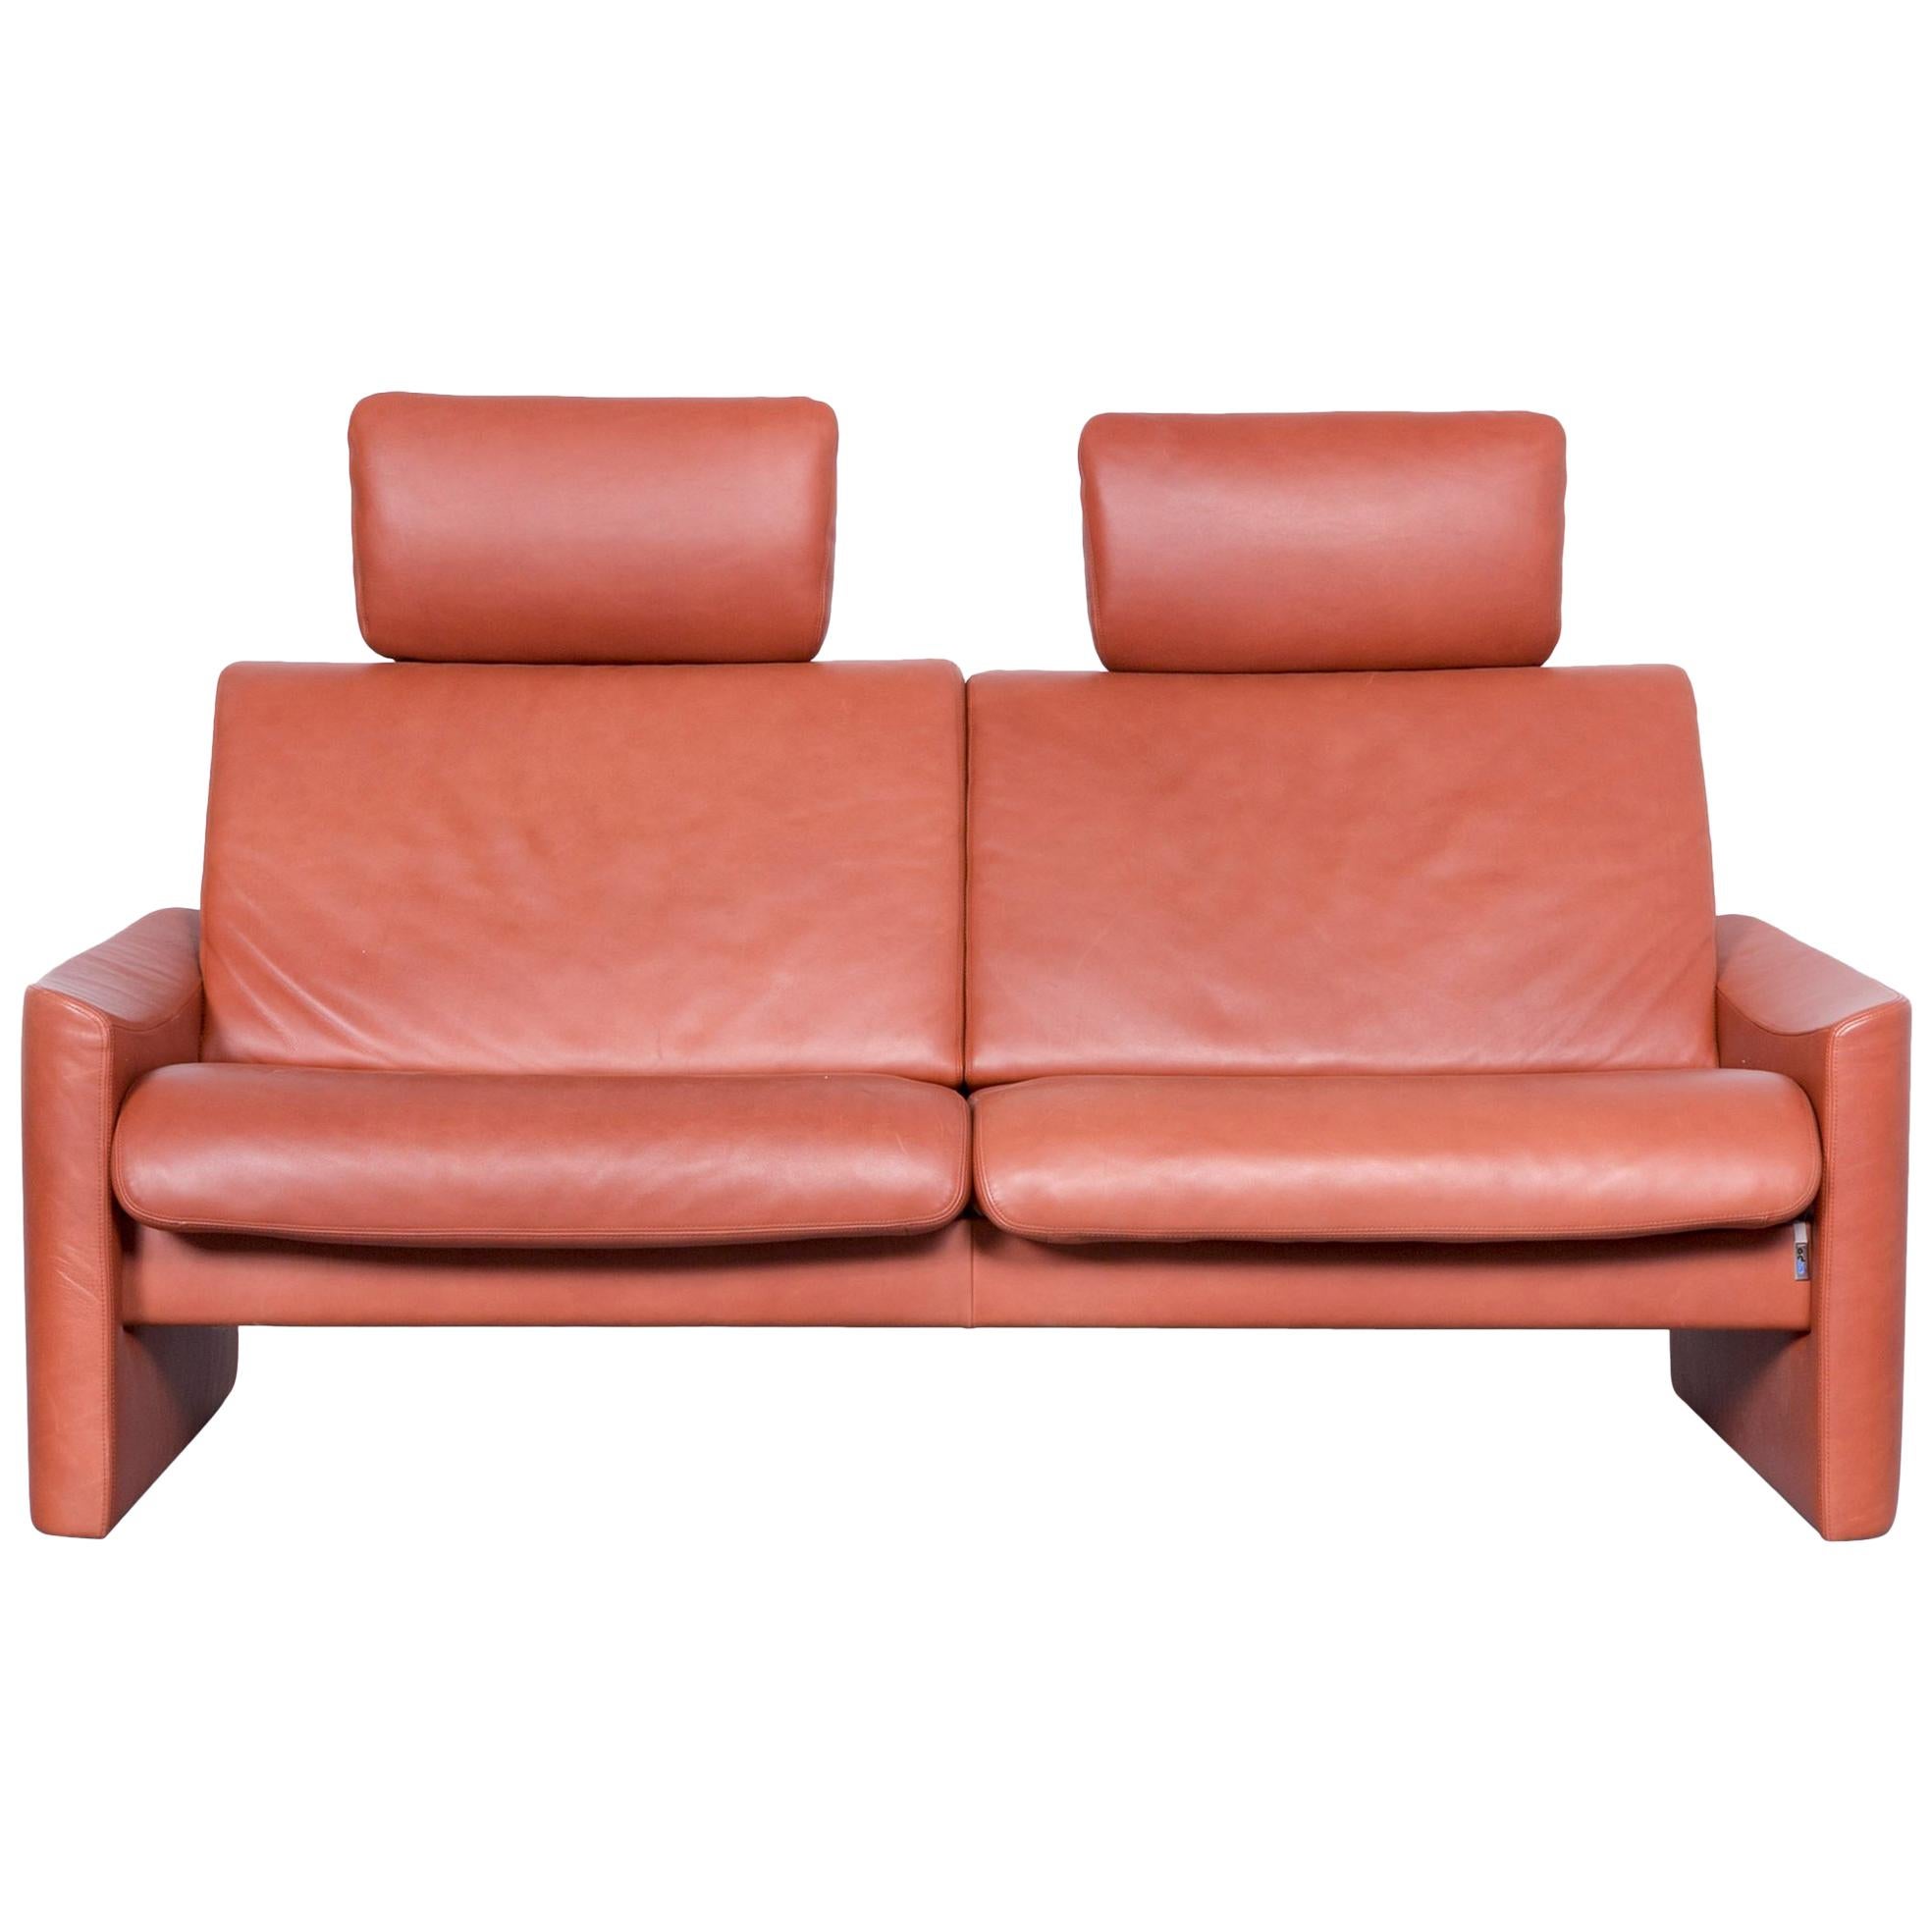 Erpo Designer Sofa Leather Brown Two-Seat Couch Modern Recliner For Sale